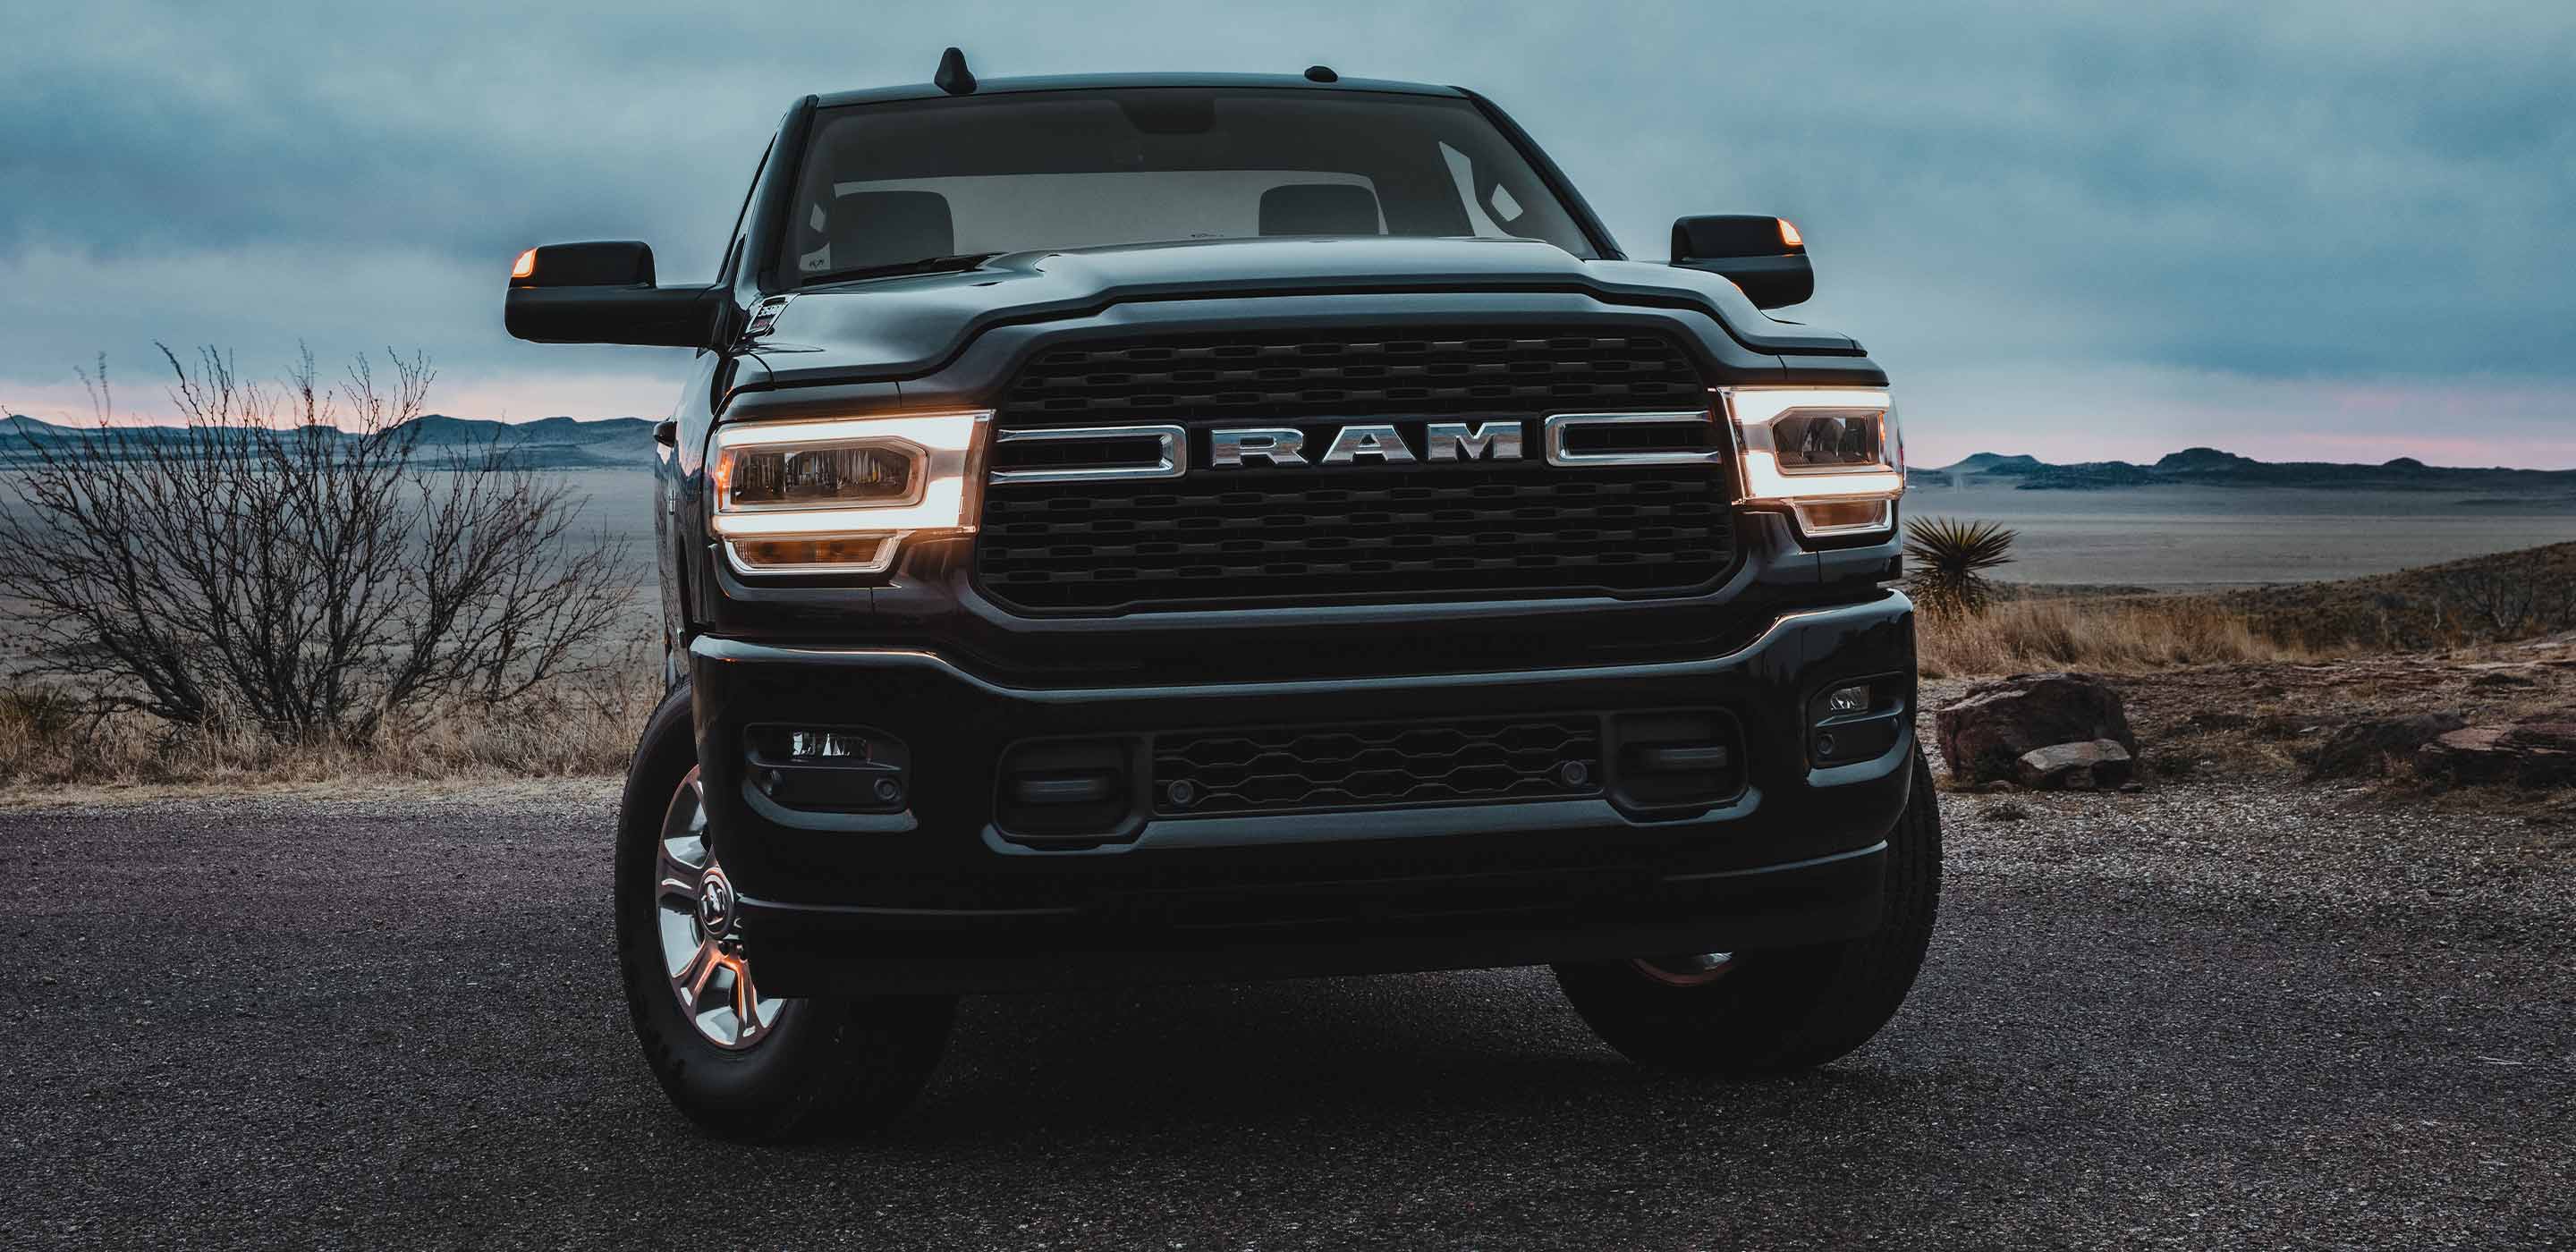 2022 Ram 3500 Gallery | View Heavy Duty Truck Pictures